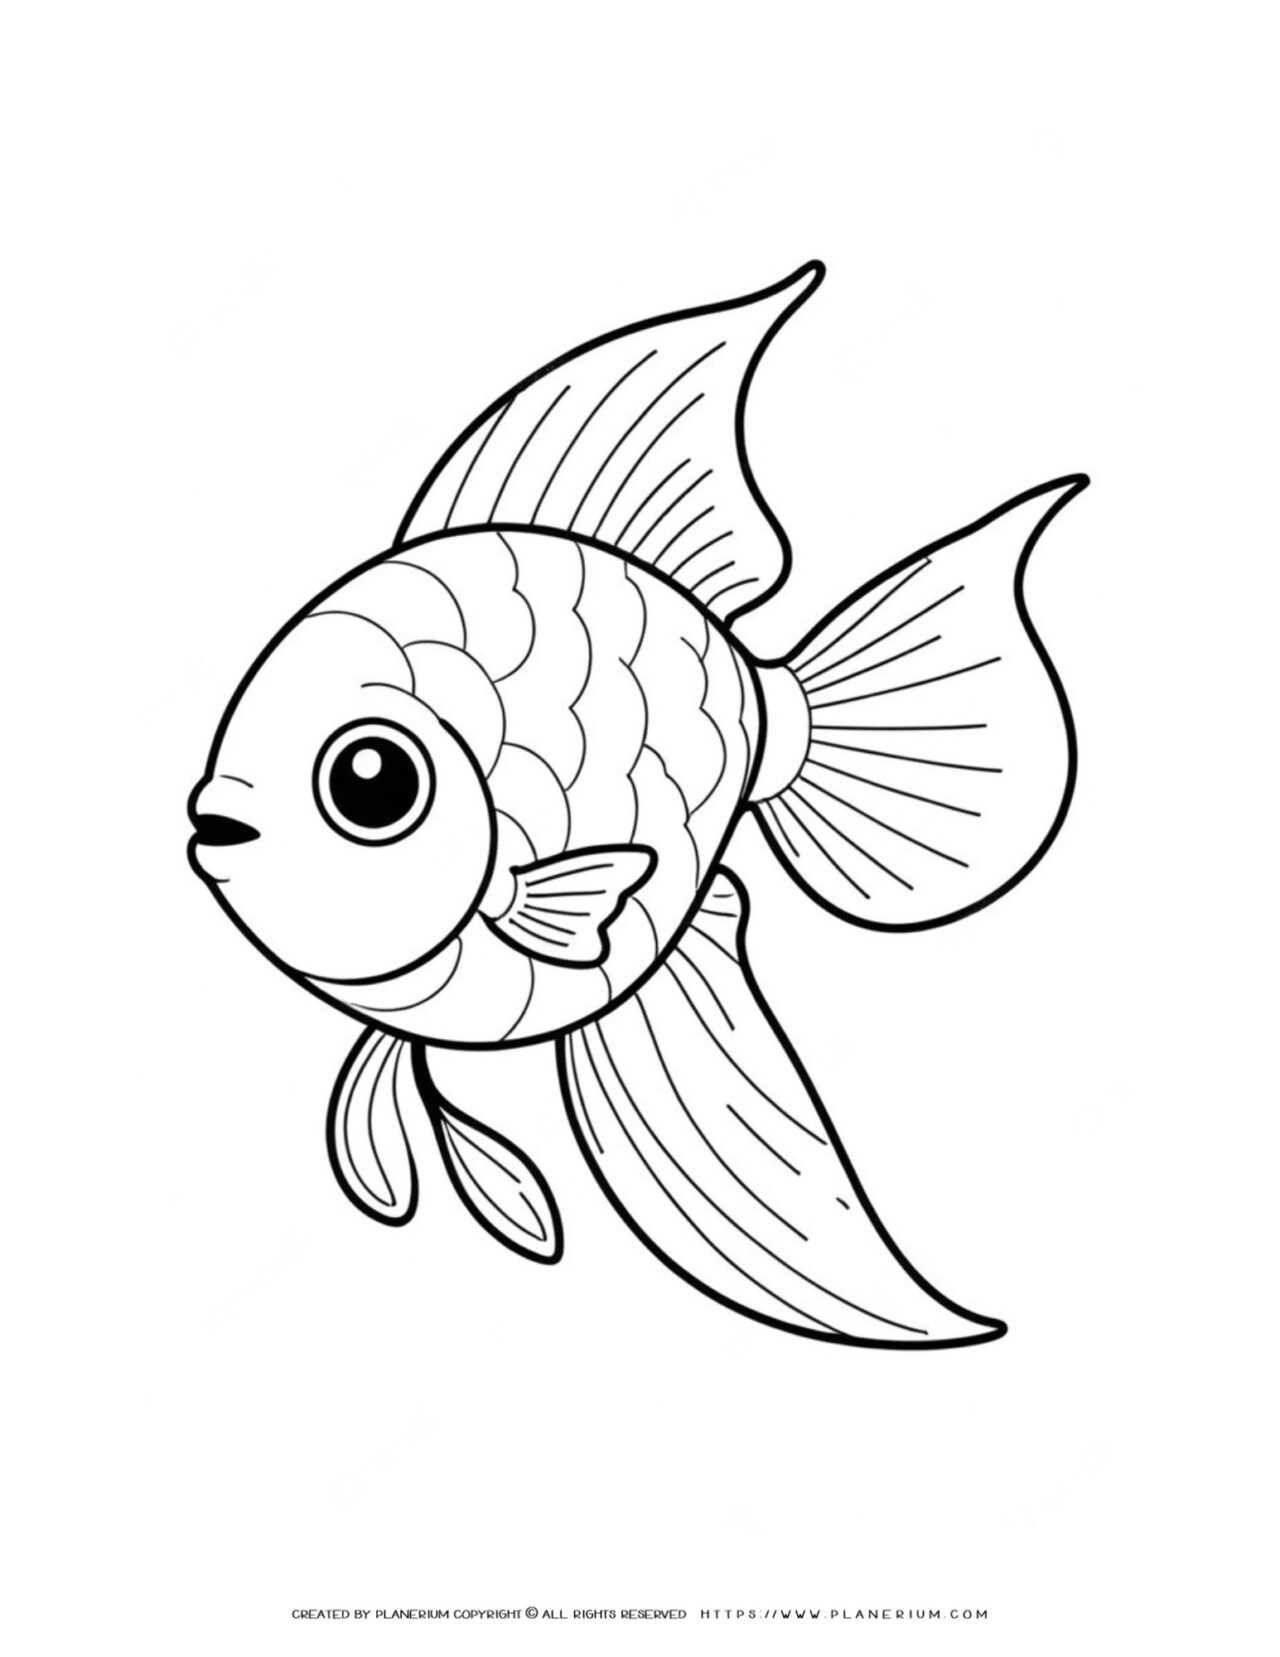 Printable-goldfish-coloring-page-for-kids